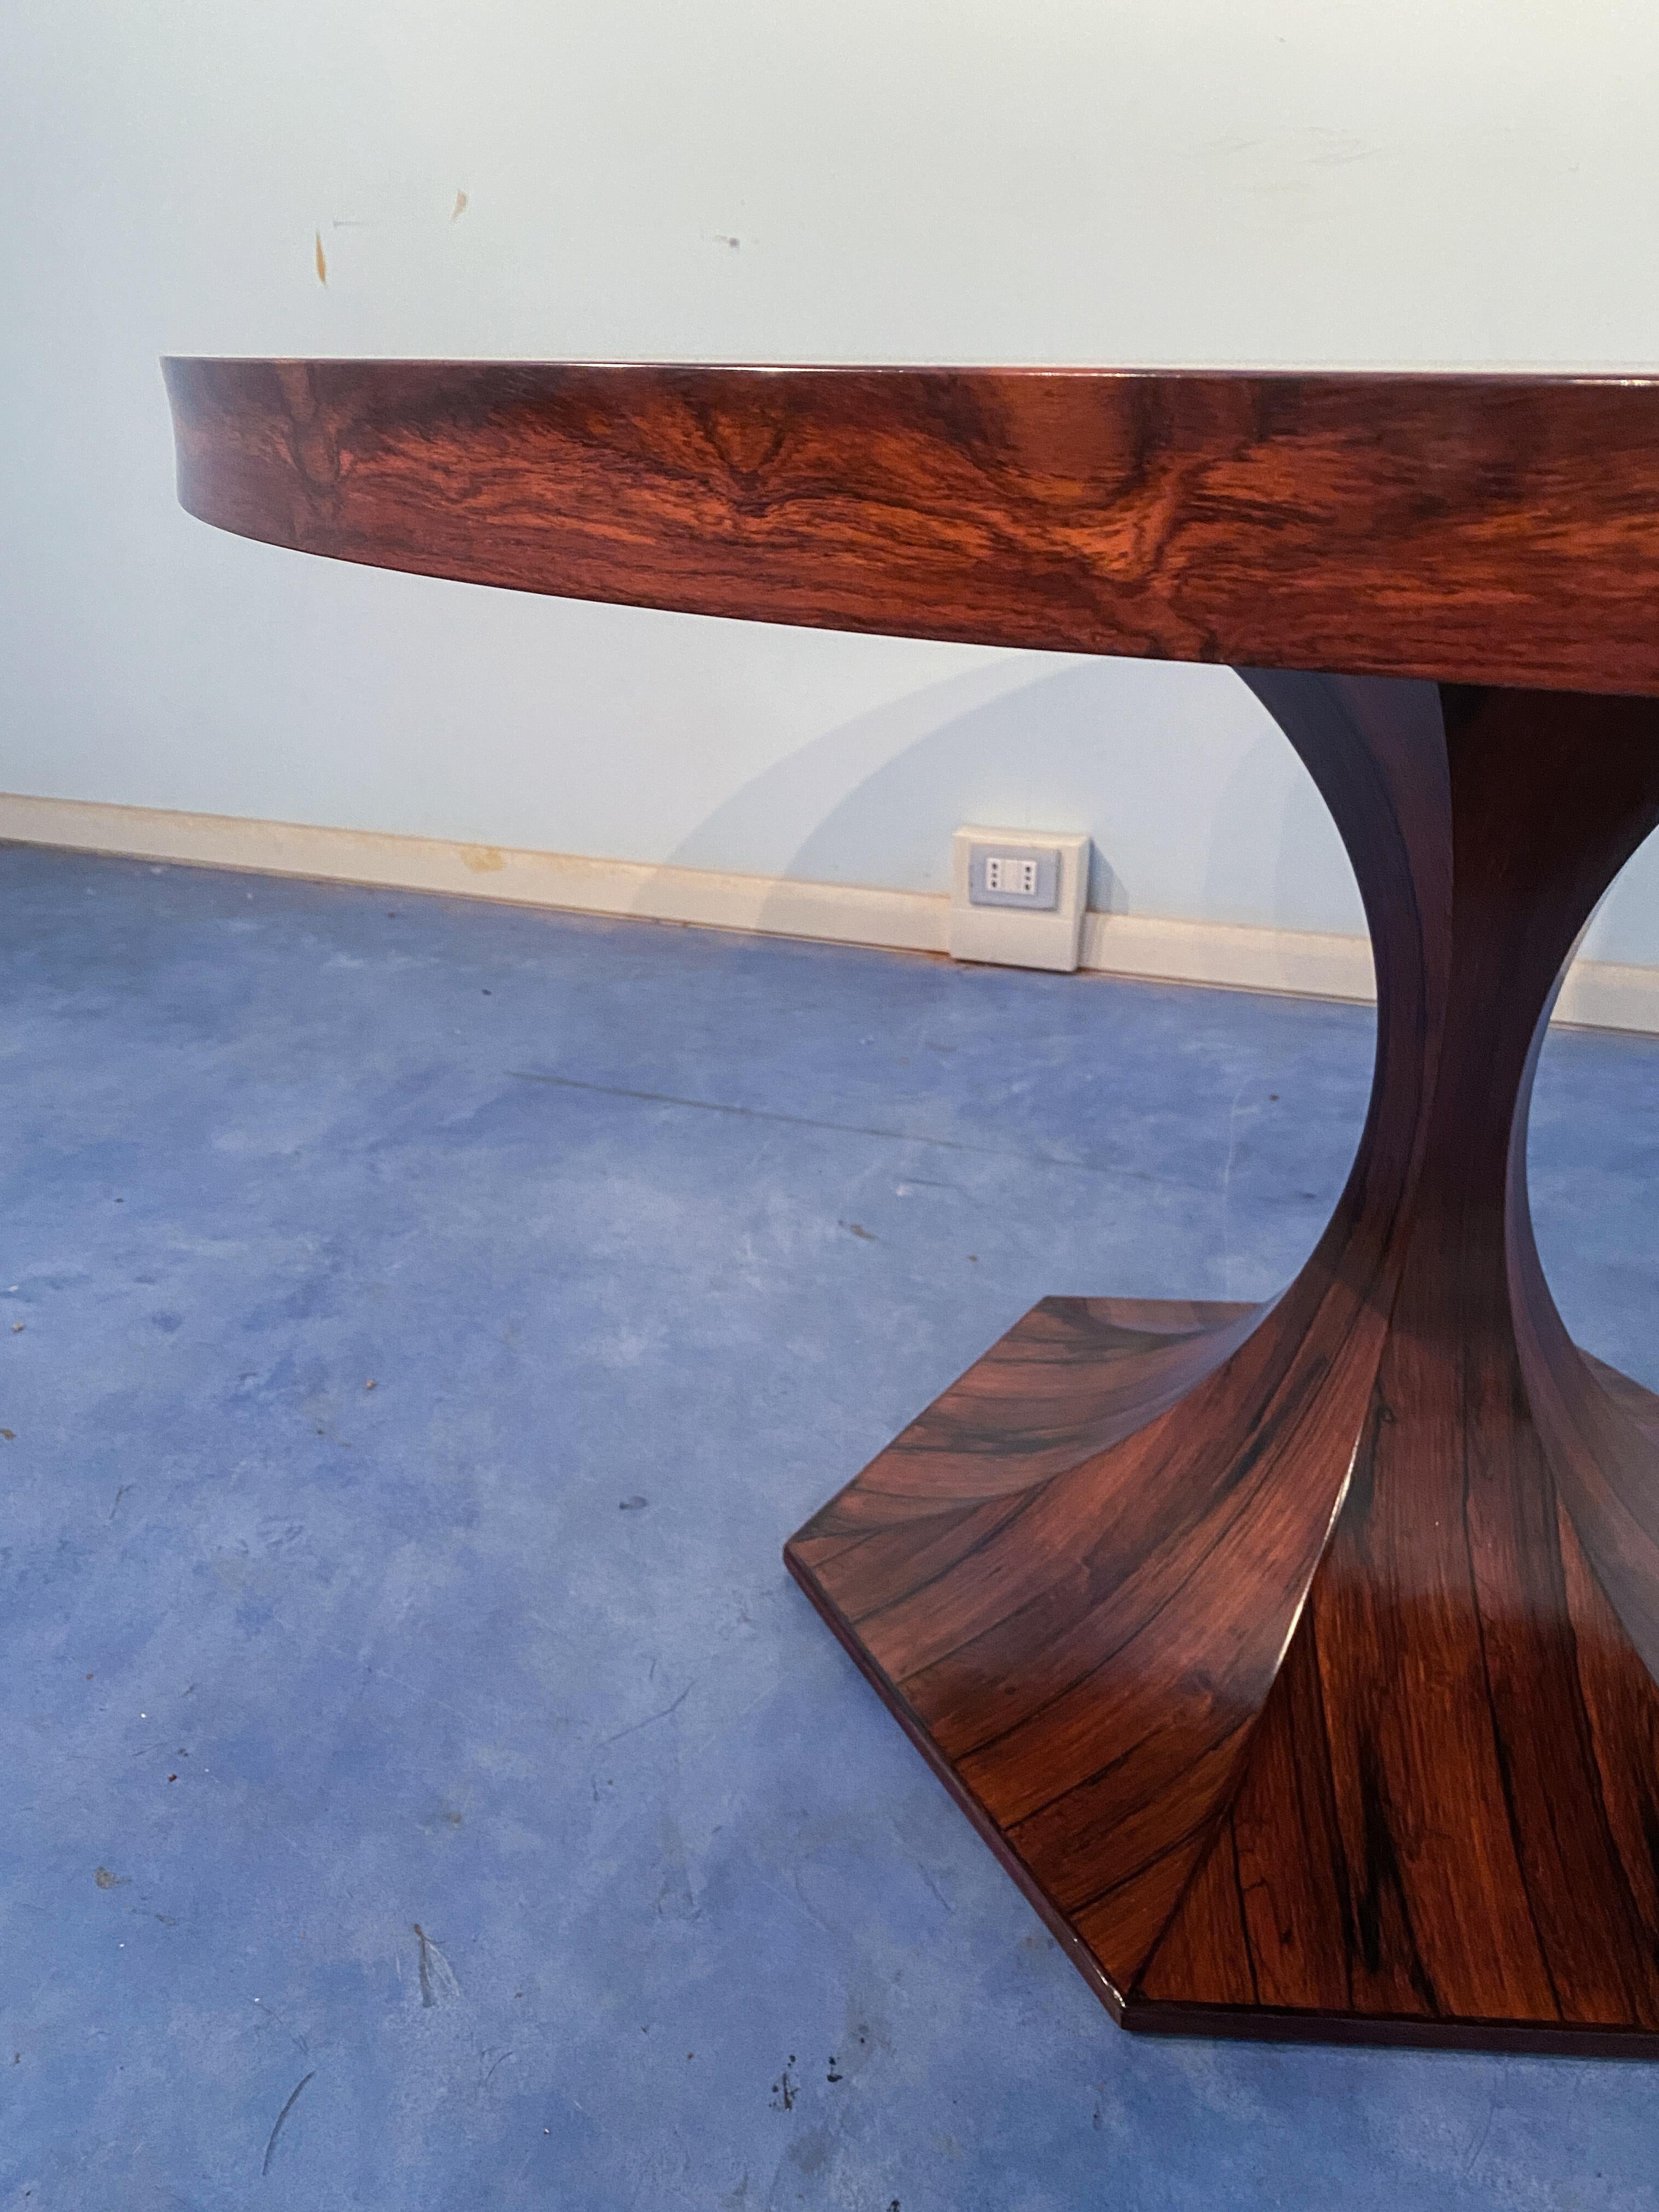 Italian Midcentury Circular Dining Table in Mahogany by Giulio Moscatelli, 1964 For Sale 8